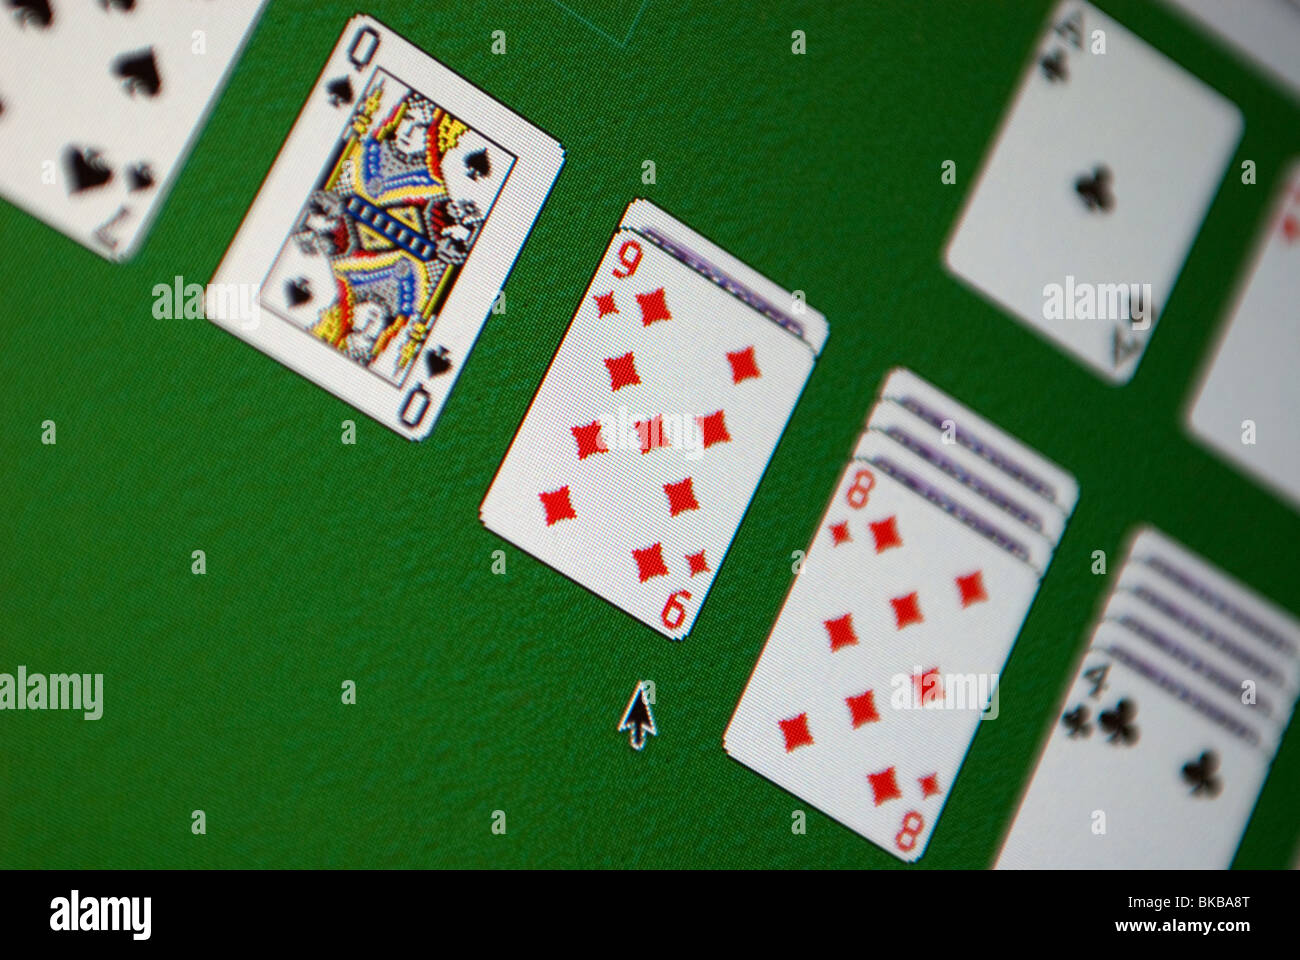 Freecell Solitaire Card Game On Green Background With Standard Playing  Cards Stock Illustration - Download Image Now - iStock